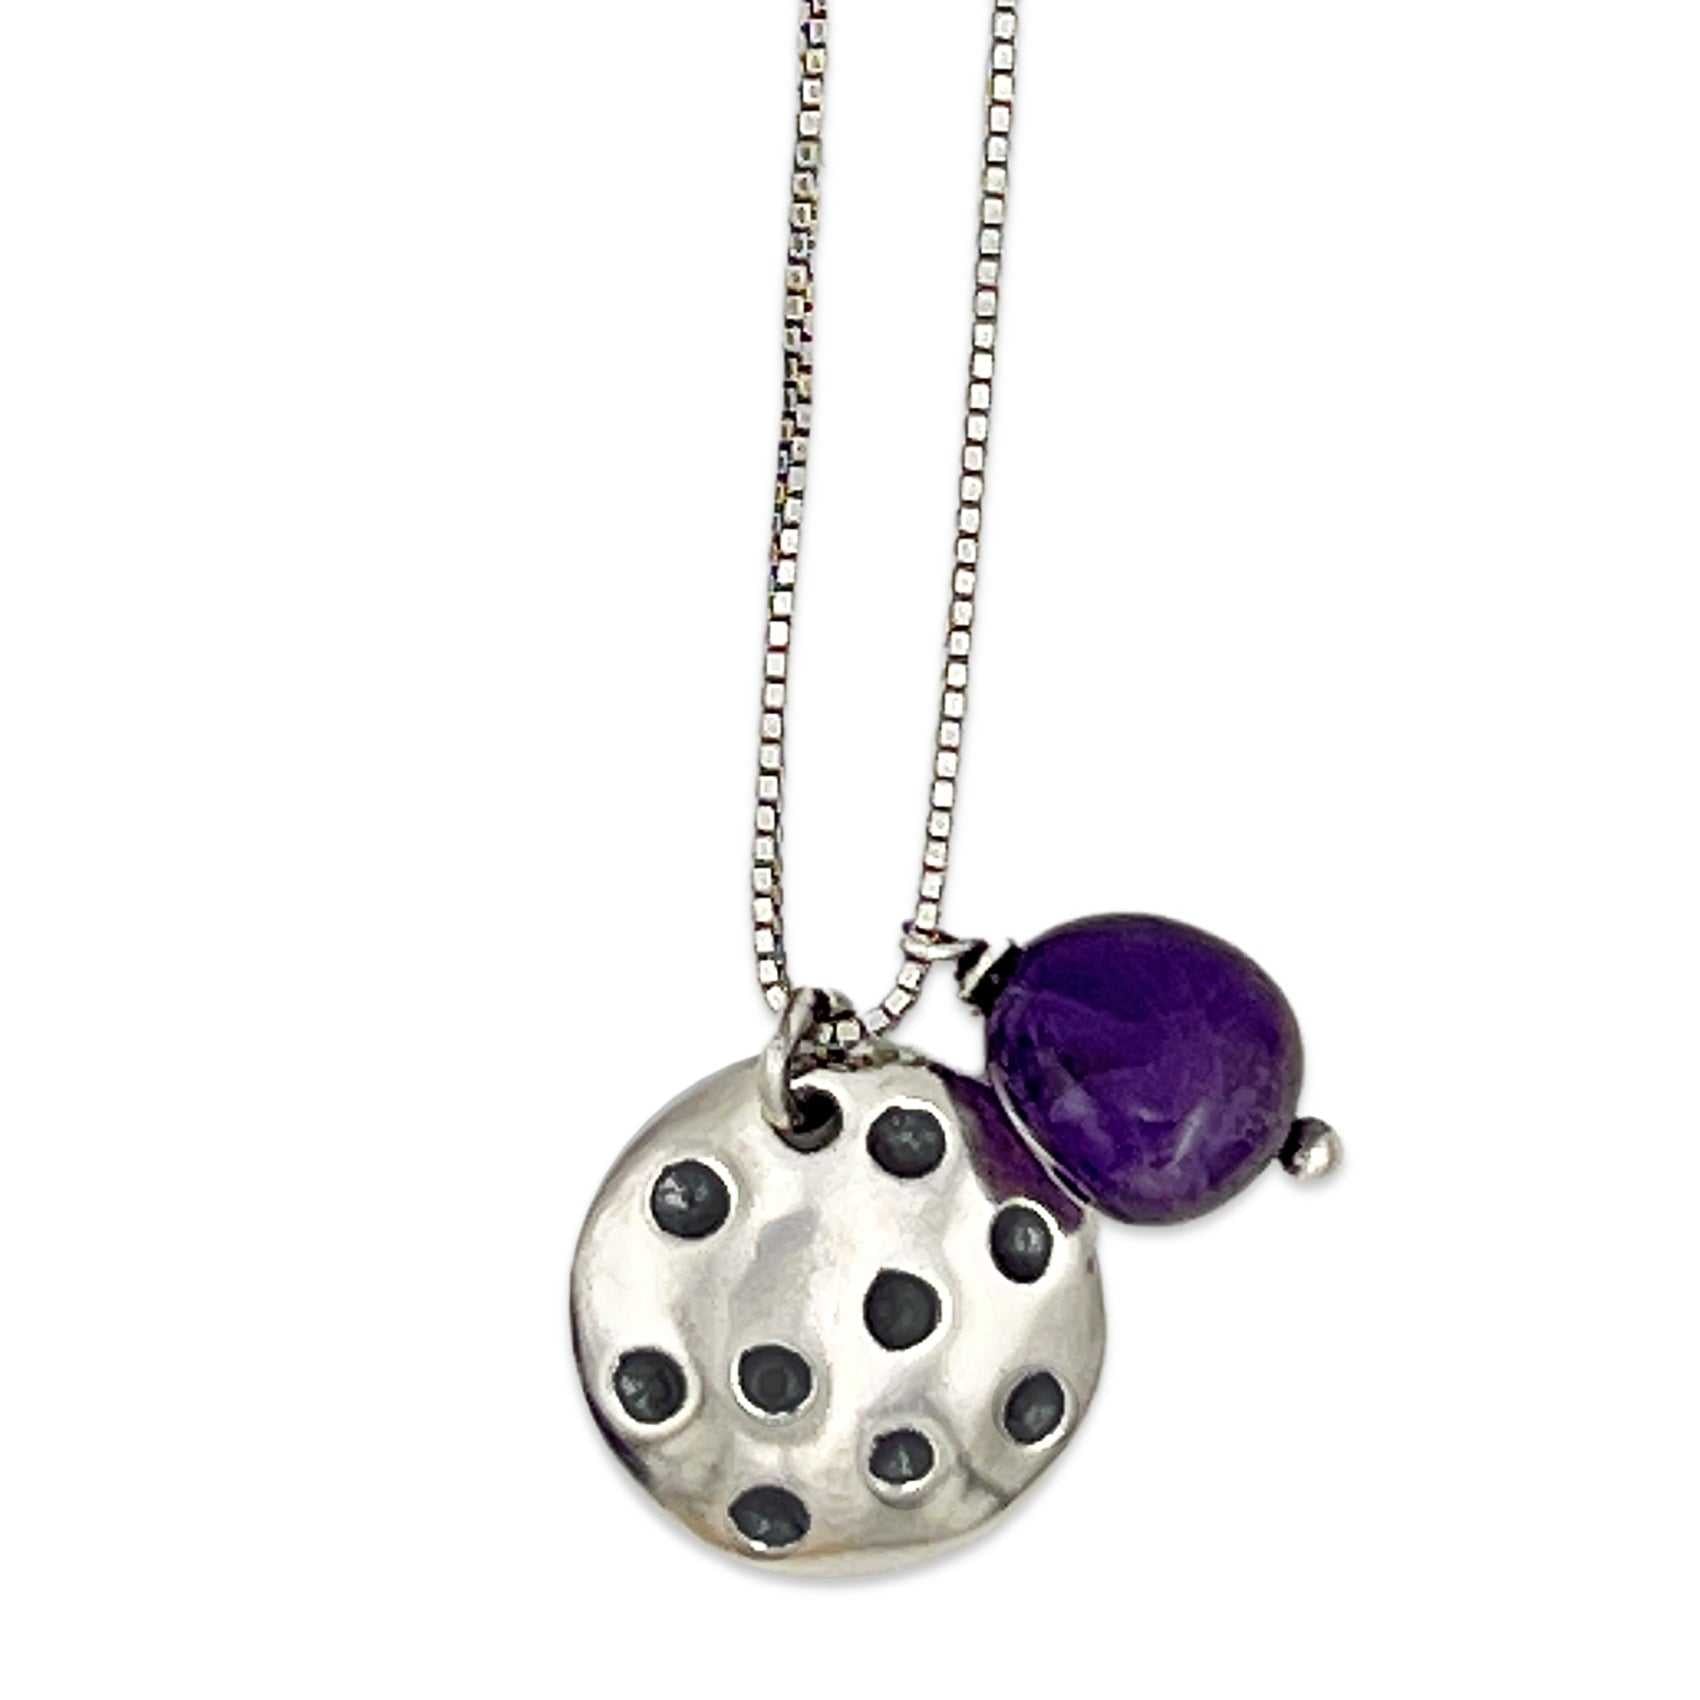 Pickle Ball Charm Necklace with Amethyst